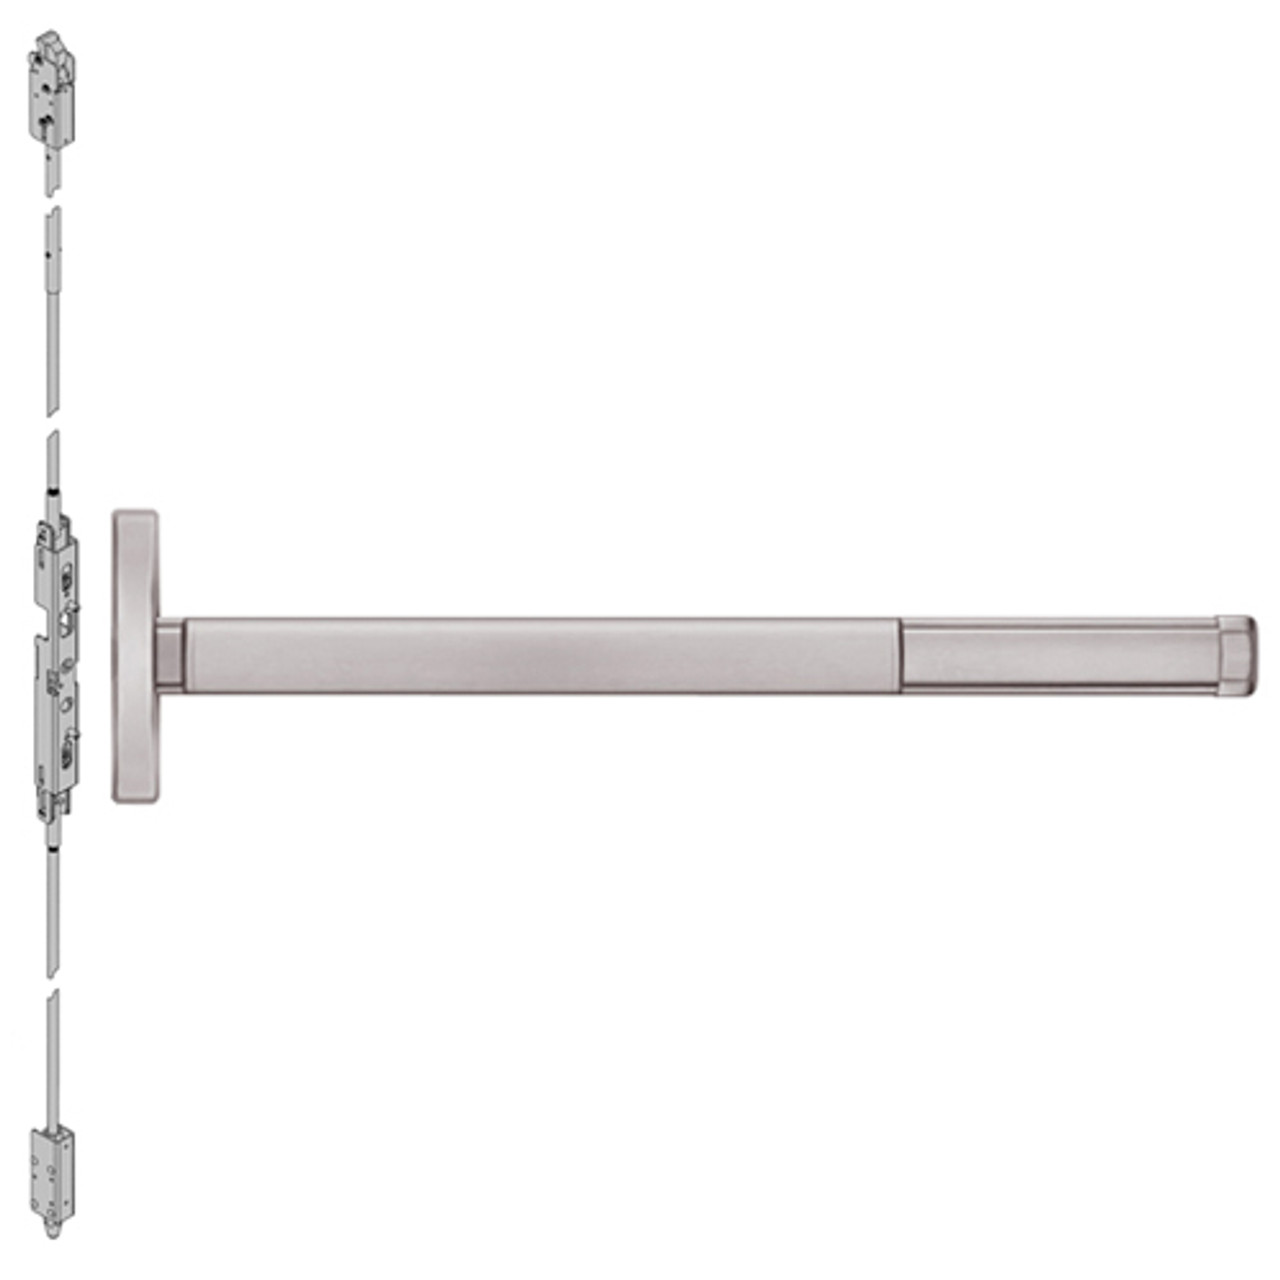 DE2601LBR-628-48 PHI 2600 Series Concealed Vertical Rod Exit Device with Delayed Egress Prepped for Cover Plate in Satin Aluminum Finish